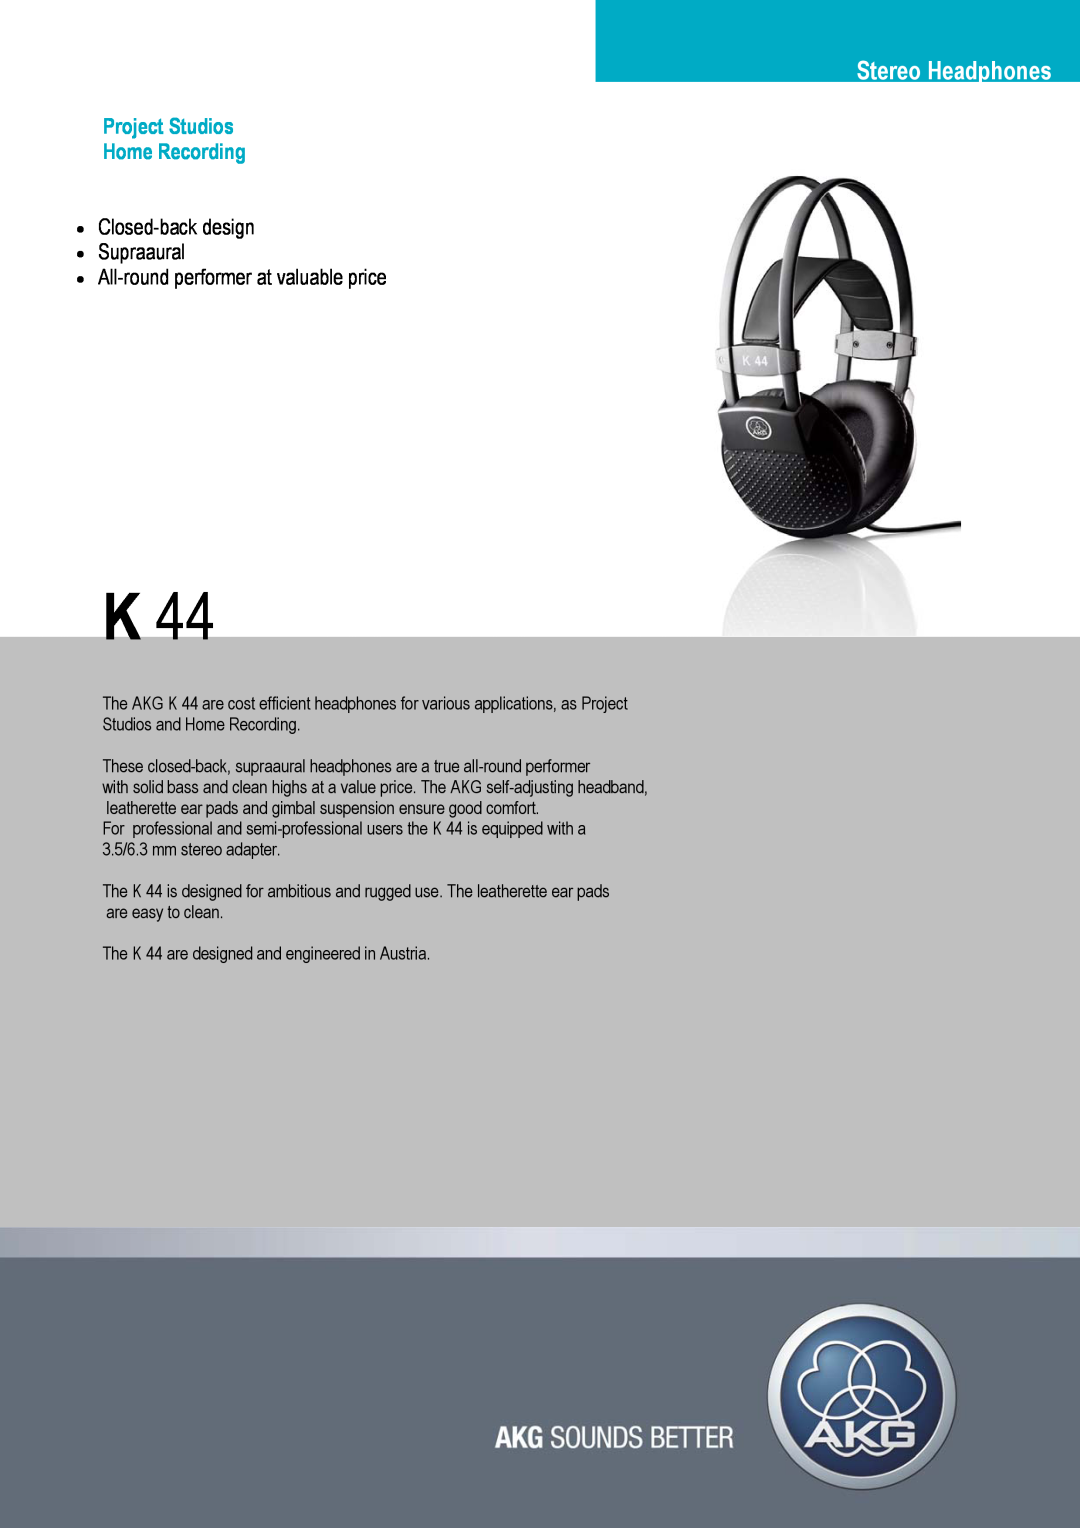 AKG Acoustics K 44 manual Stereo Headphones, Project Studios Home Recording, Closed-backdesign Supraaural 